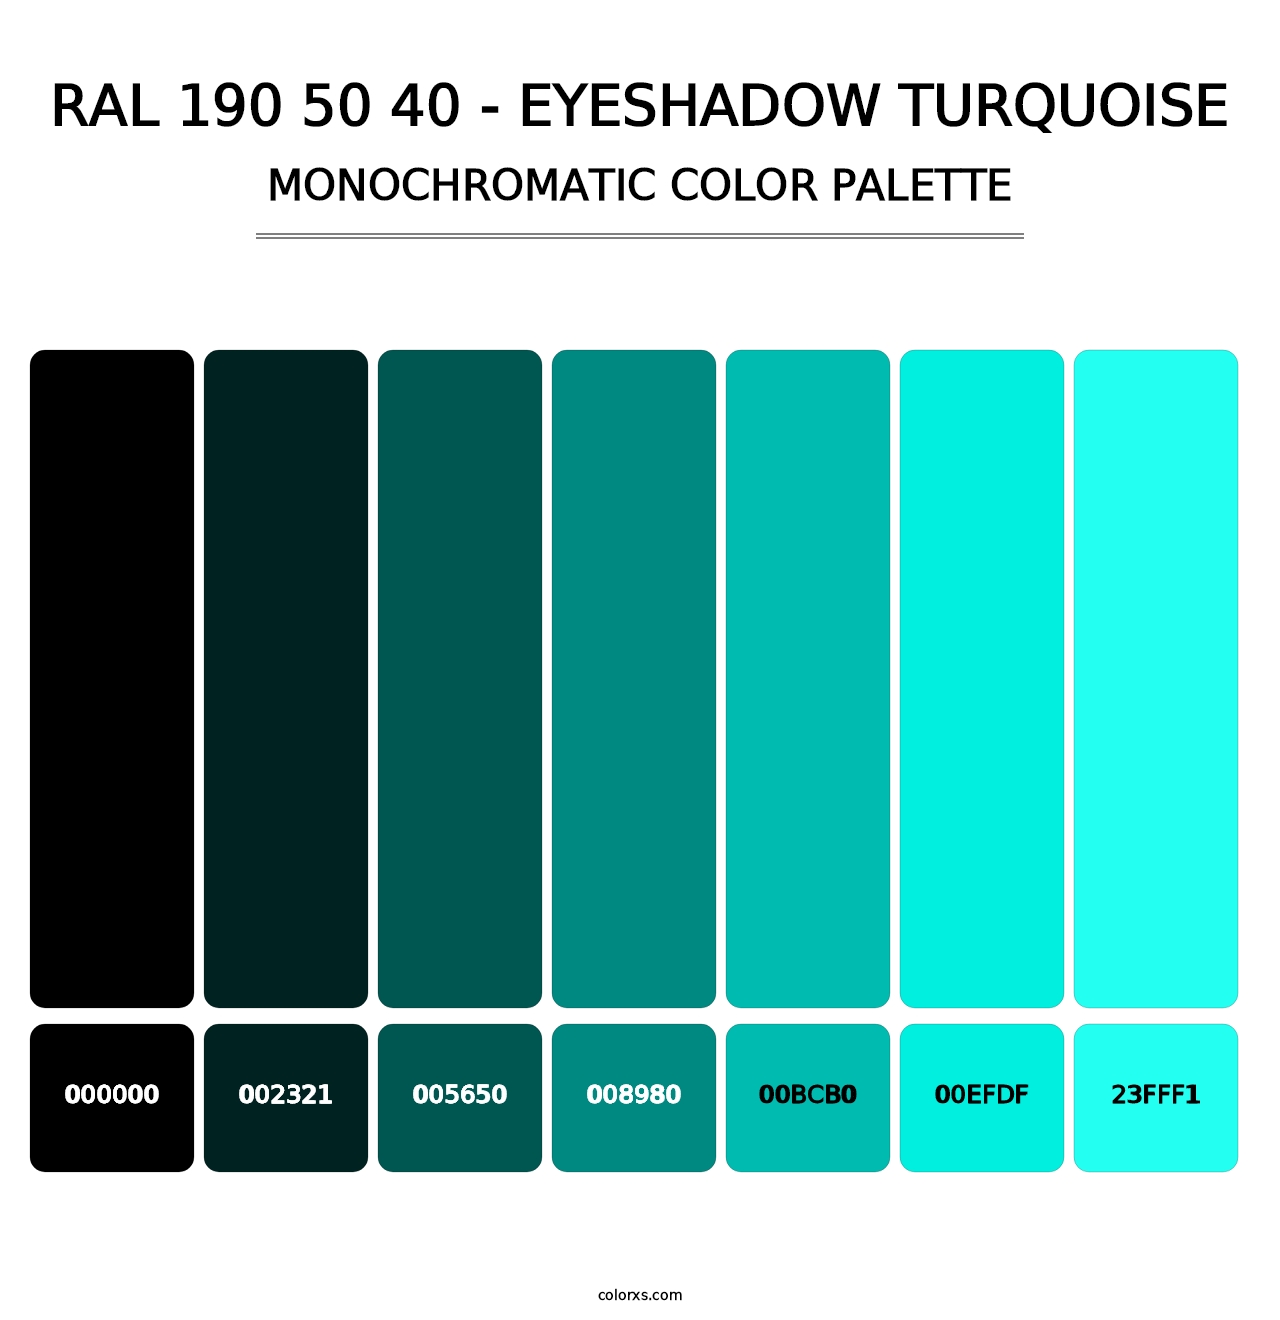 RAL 190 50 40 - Eyeshadow Turquoise - Monochromatic Color Palette